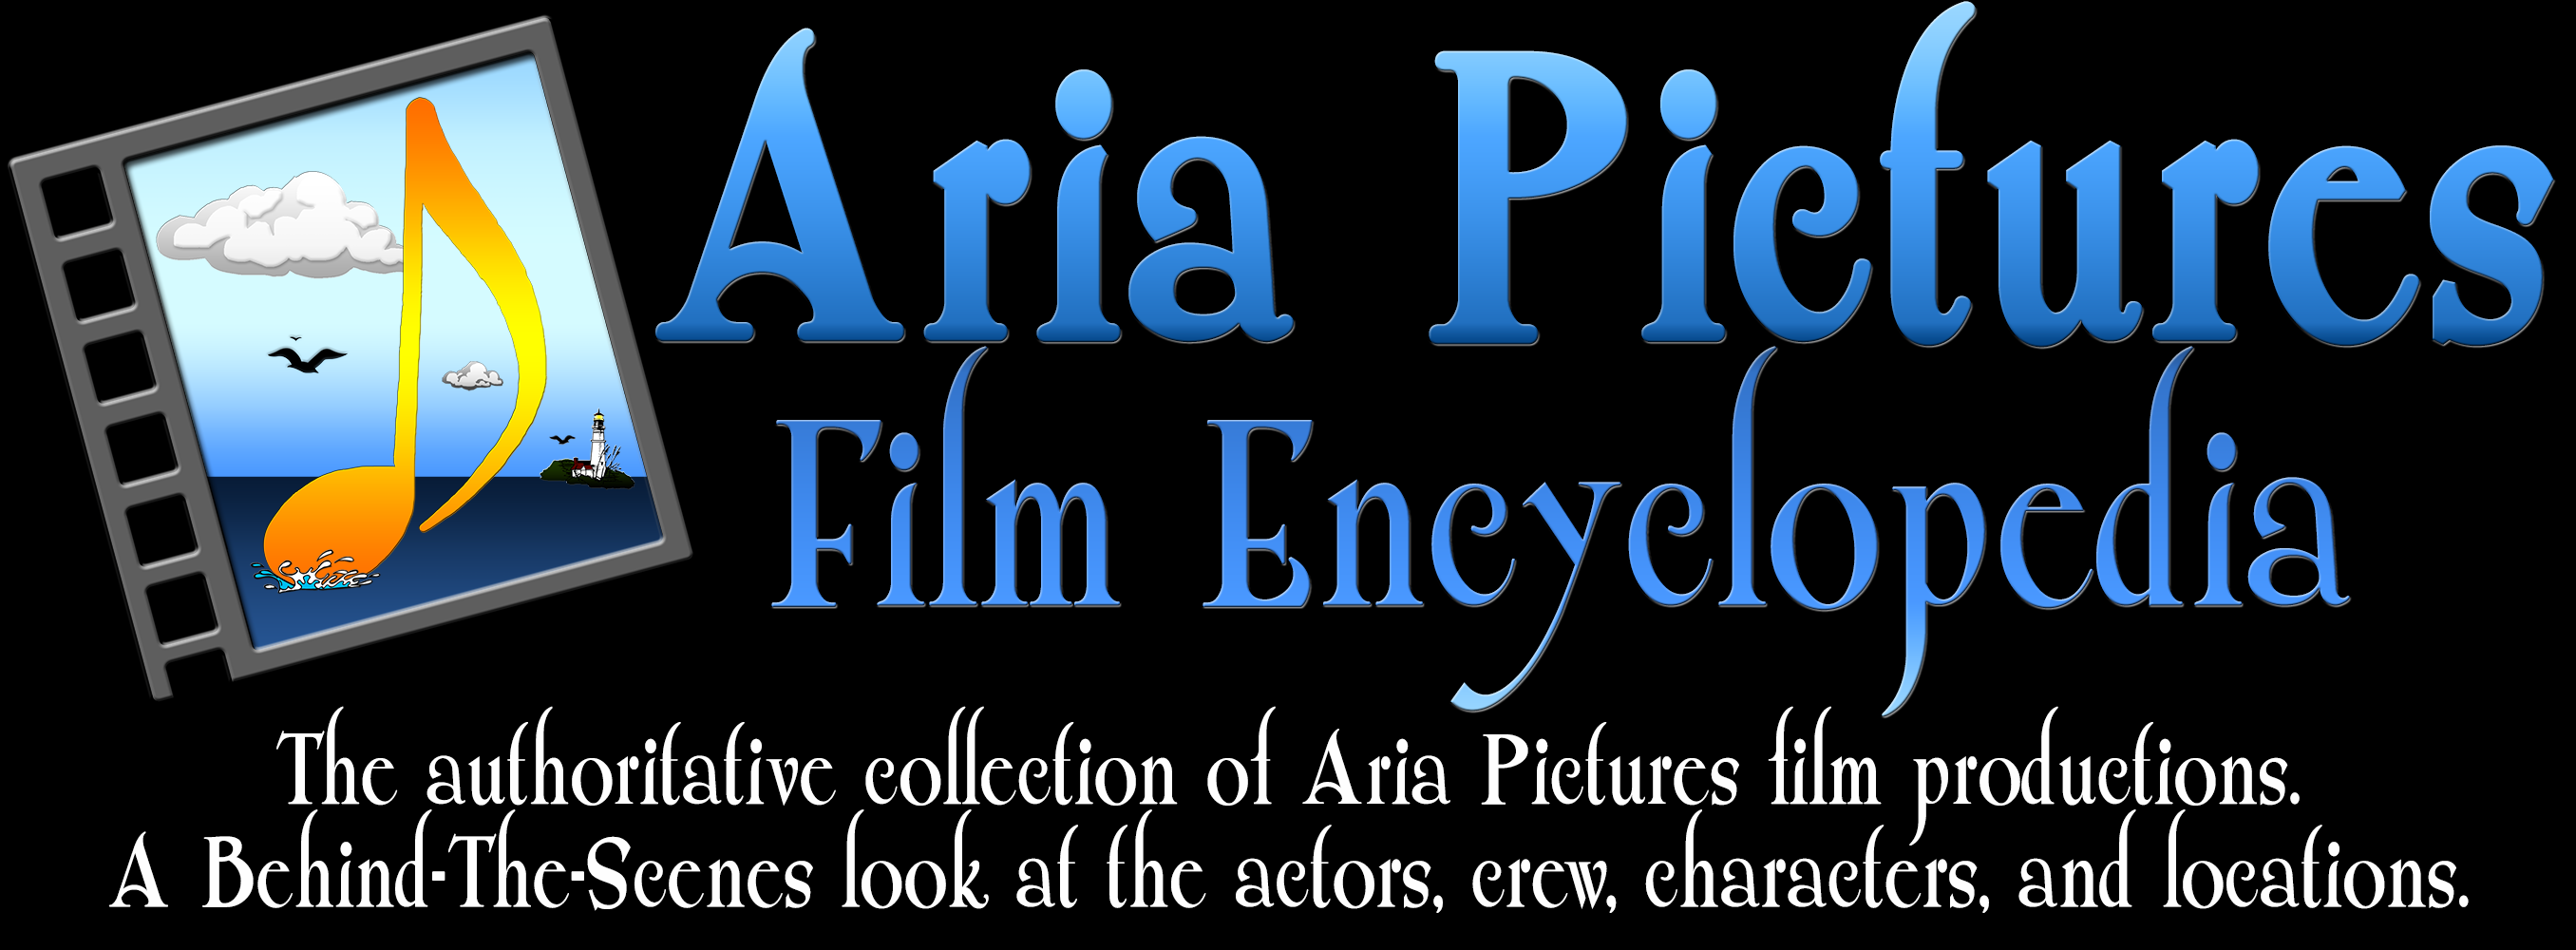 Aria Pictures Films Encyclopedia - The Authoritative Collection.